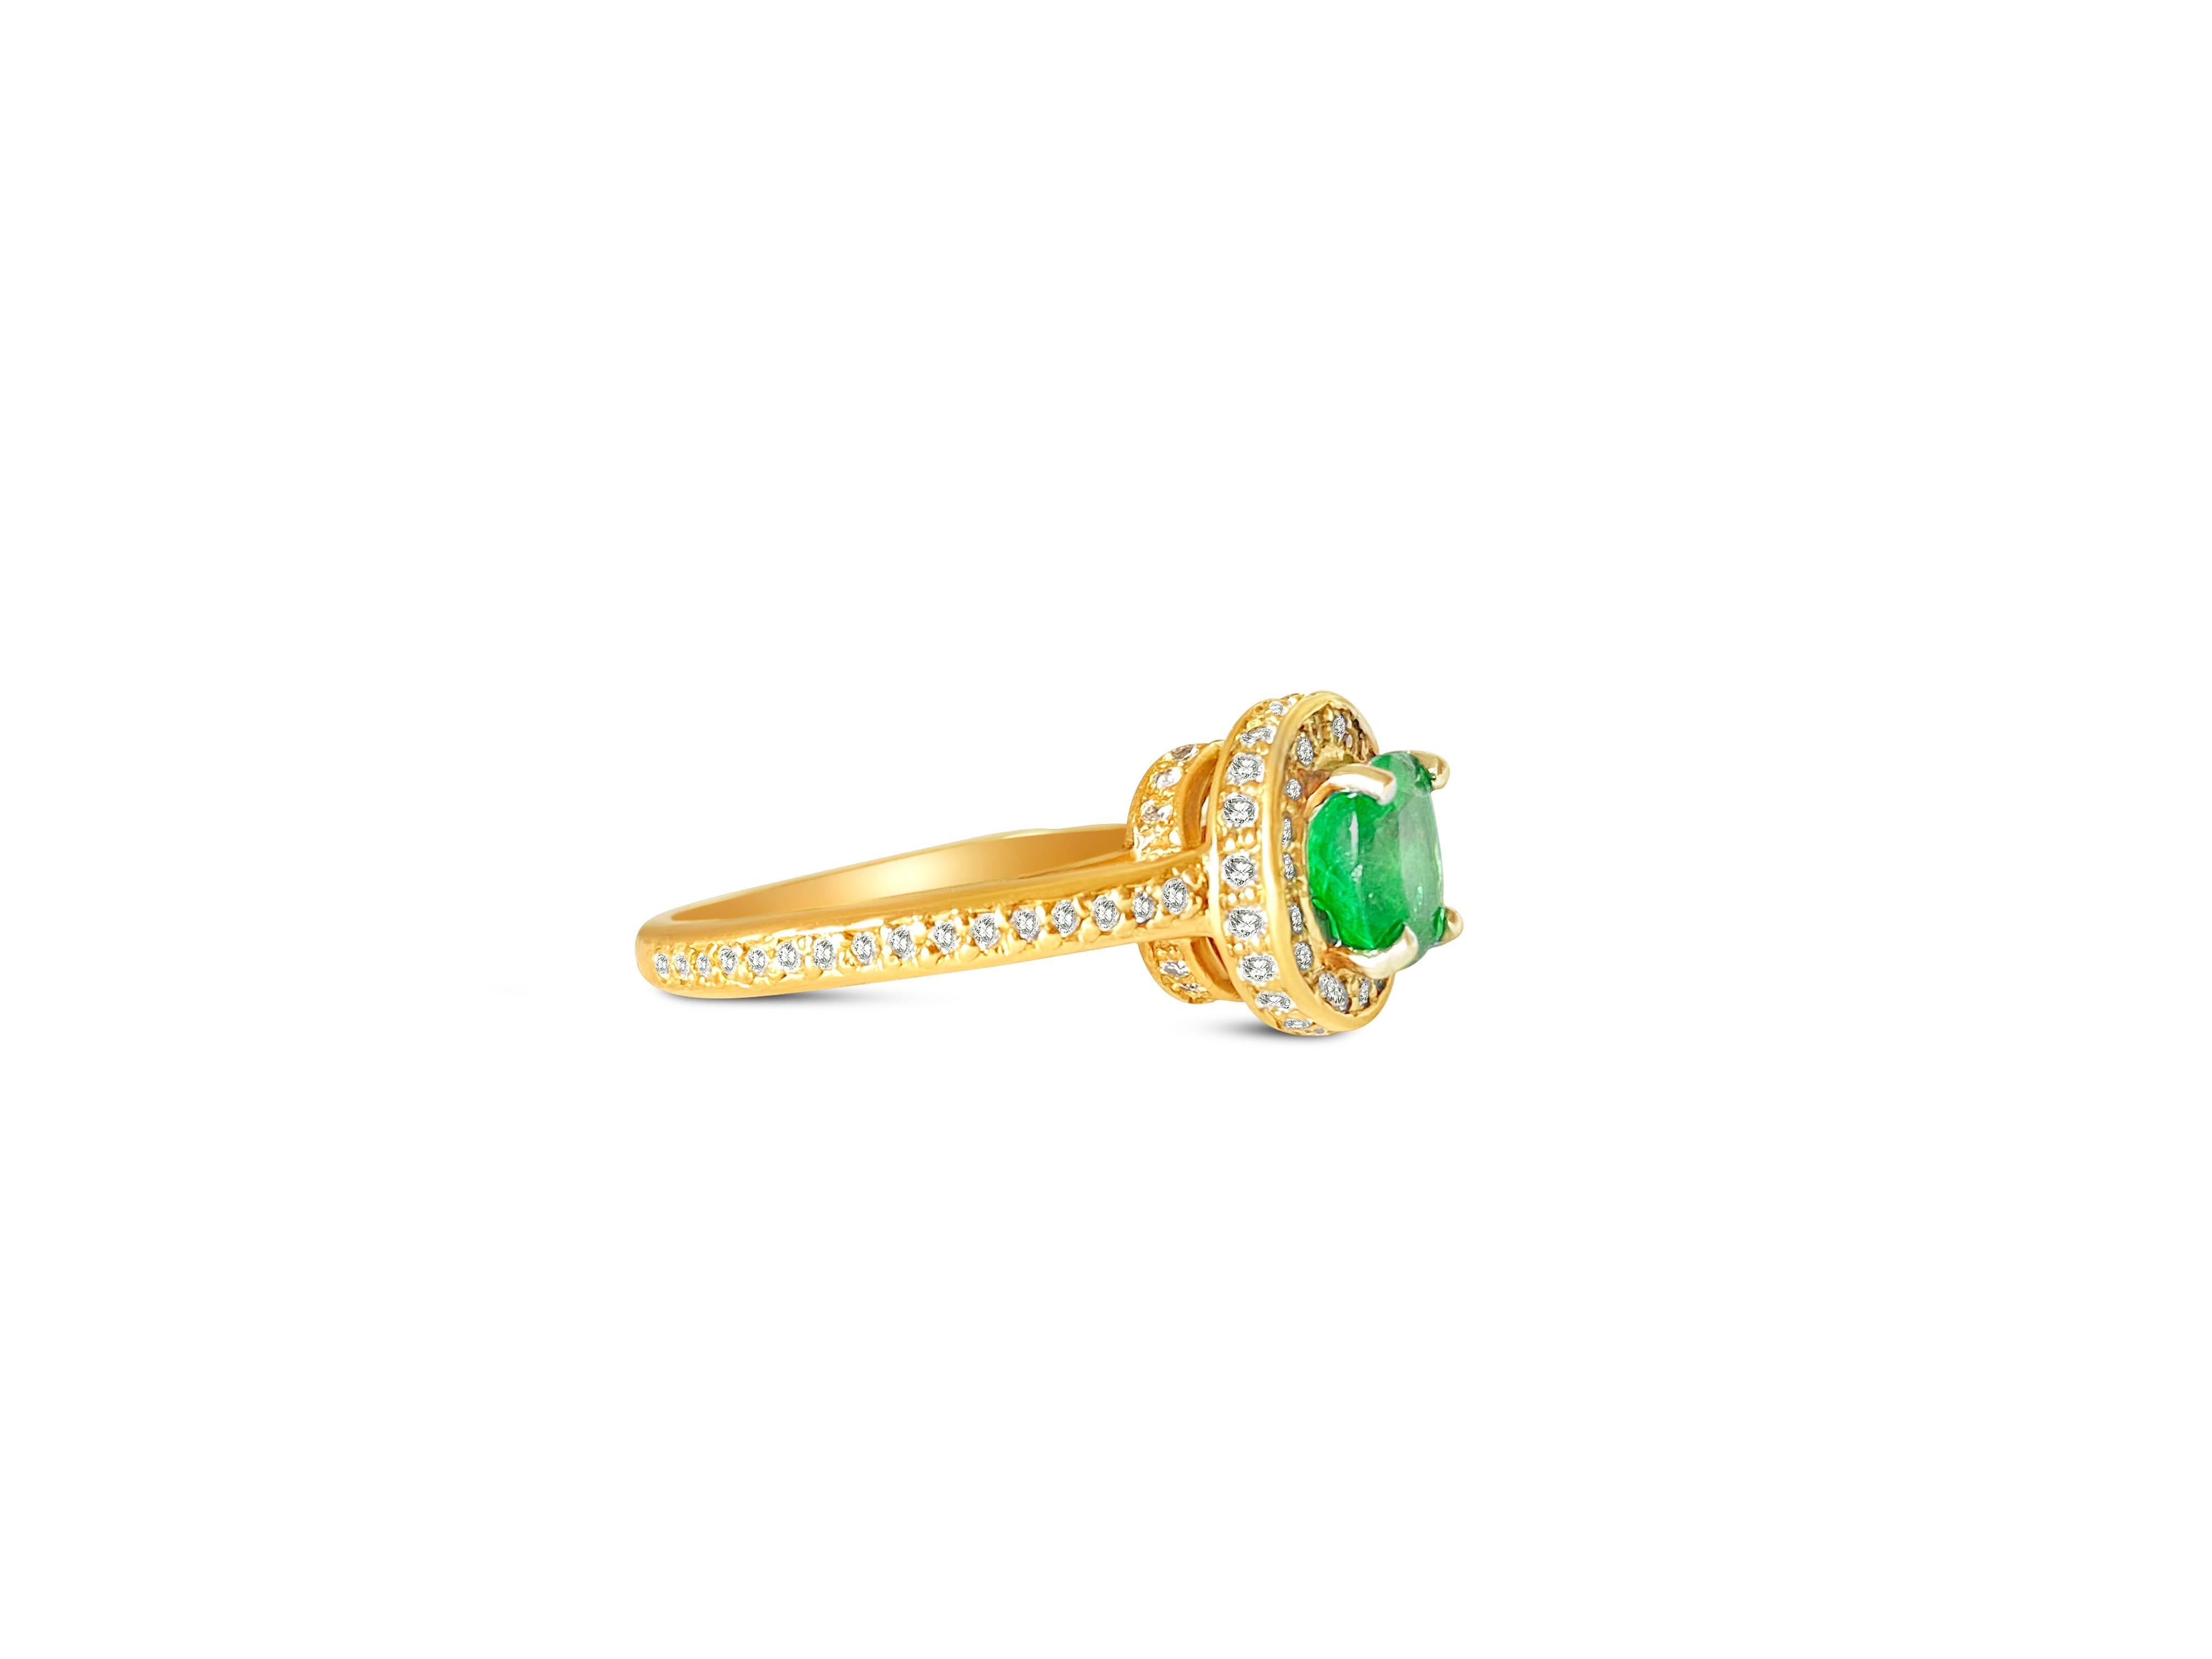 Medieval 14k Gold Colombian Emerald And Diamond Engagement Ring For Sale